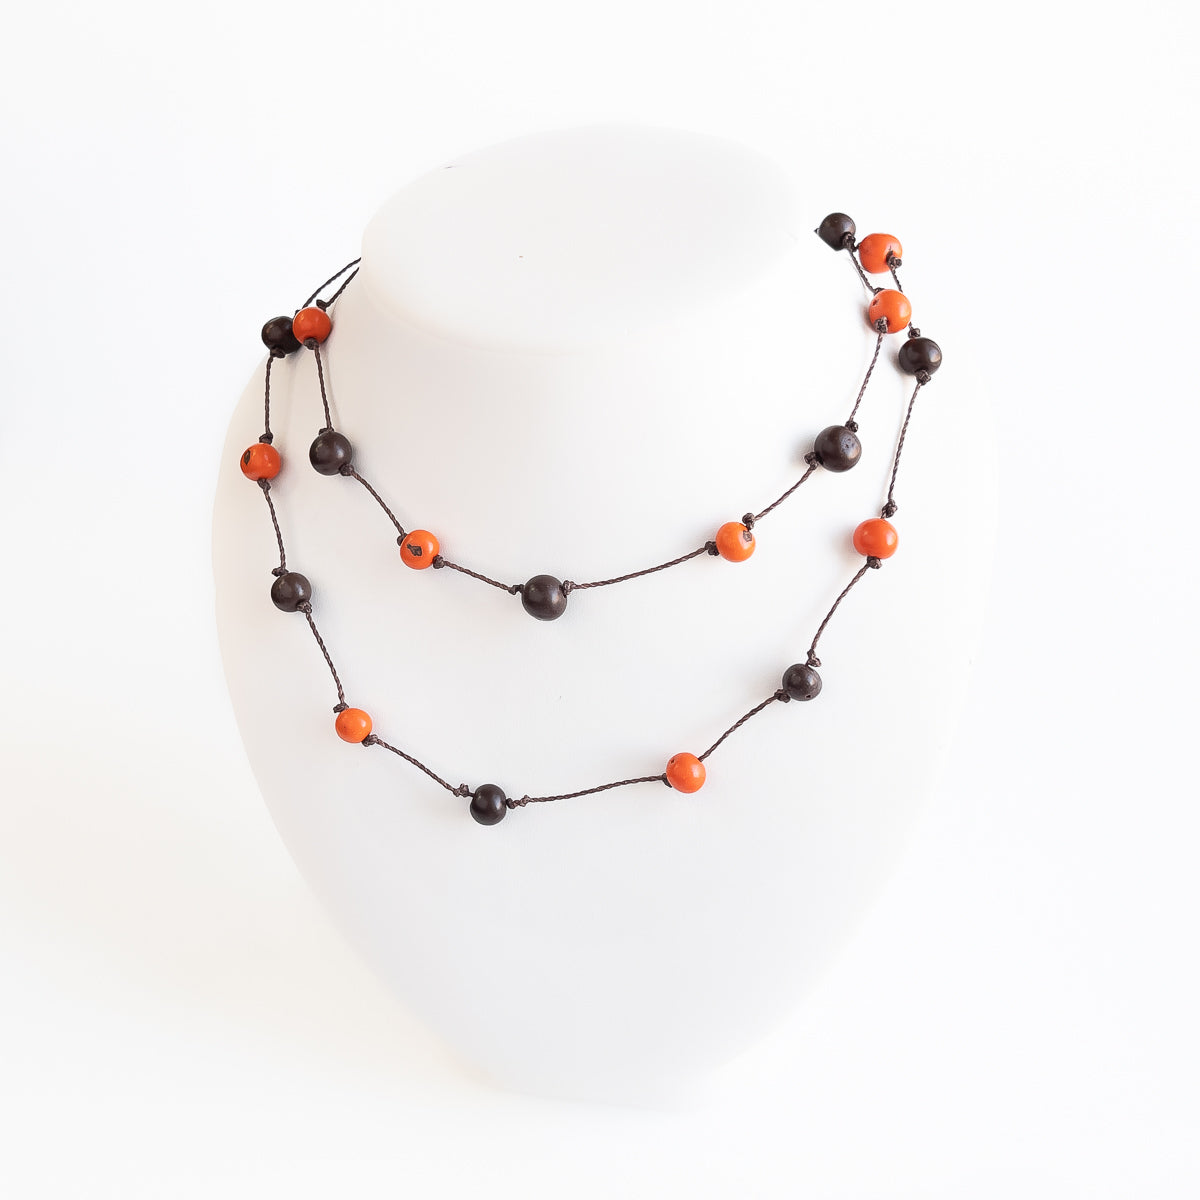 Acai Bead Necklace - Knotted Long Single Strand